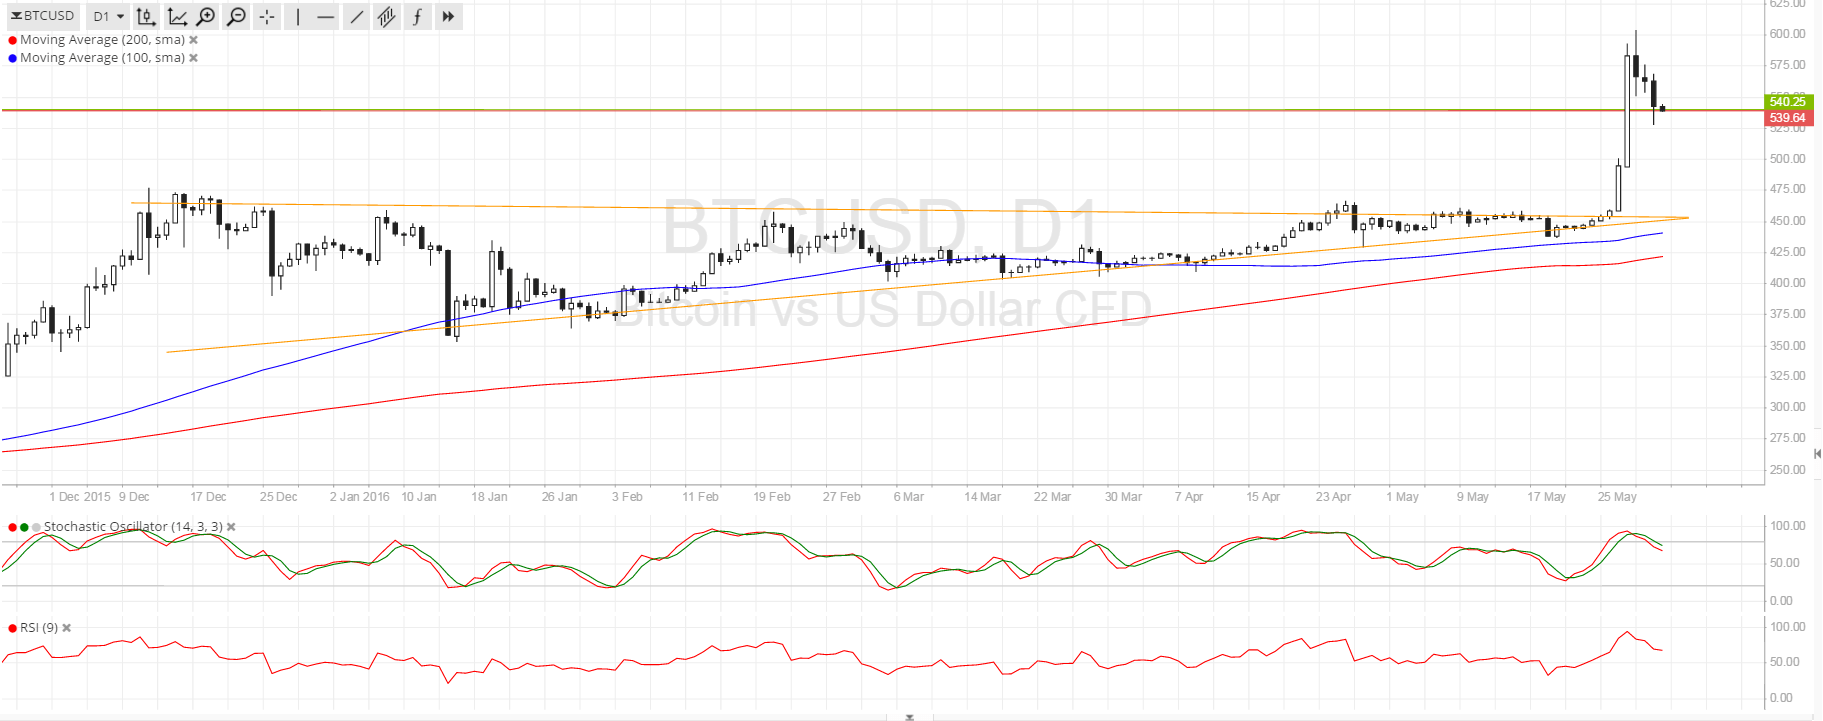 Bitcoin Price Technical Analysis for 06/01/2016 - Breakout Correction Underway